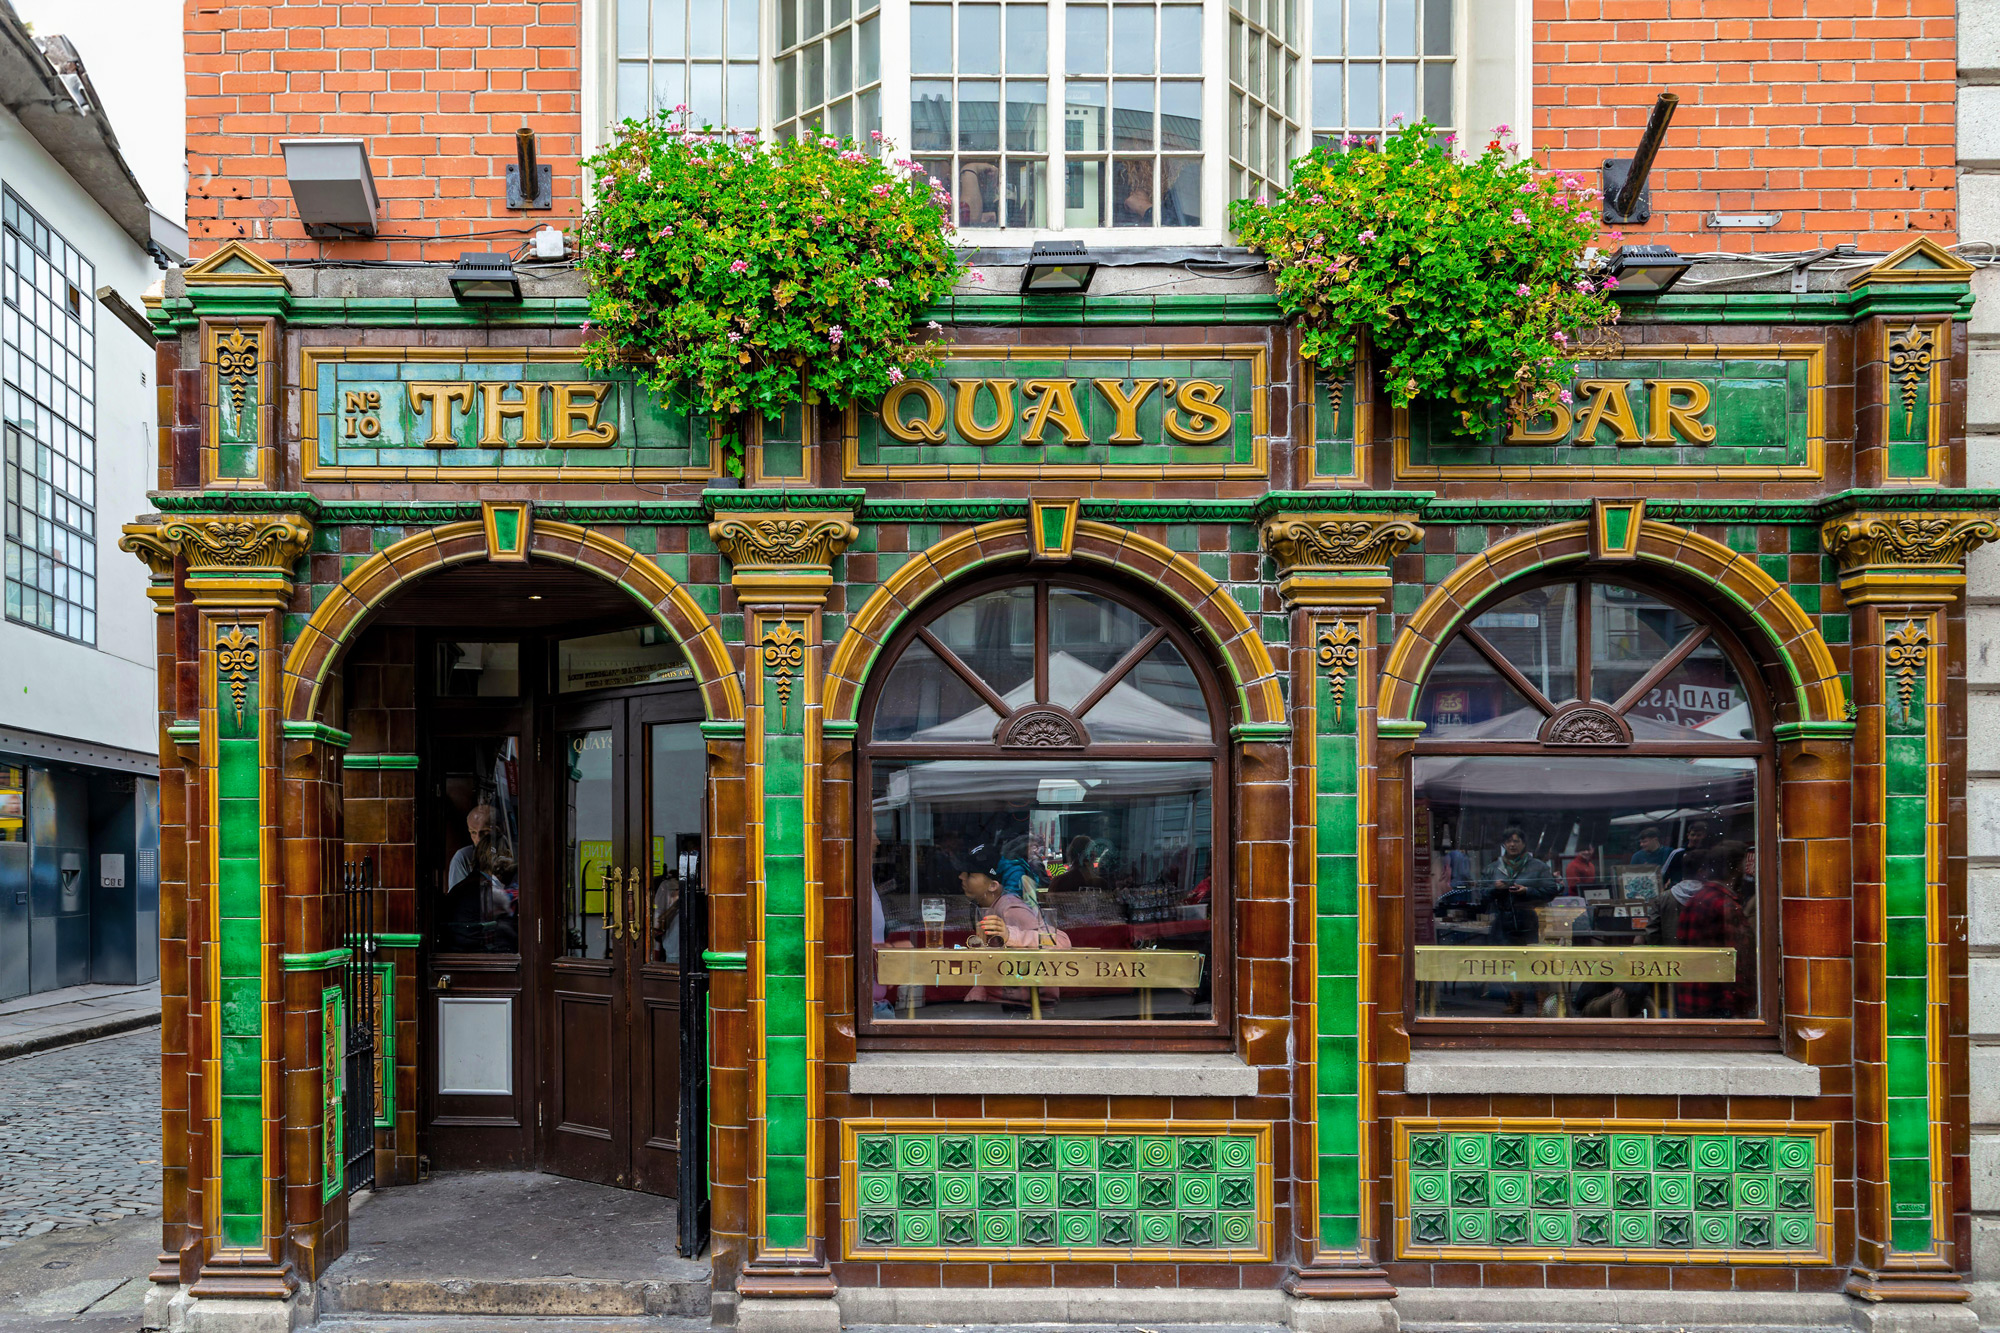 Frontage of a traditional Irish pub